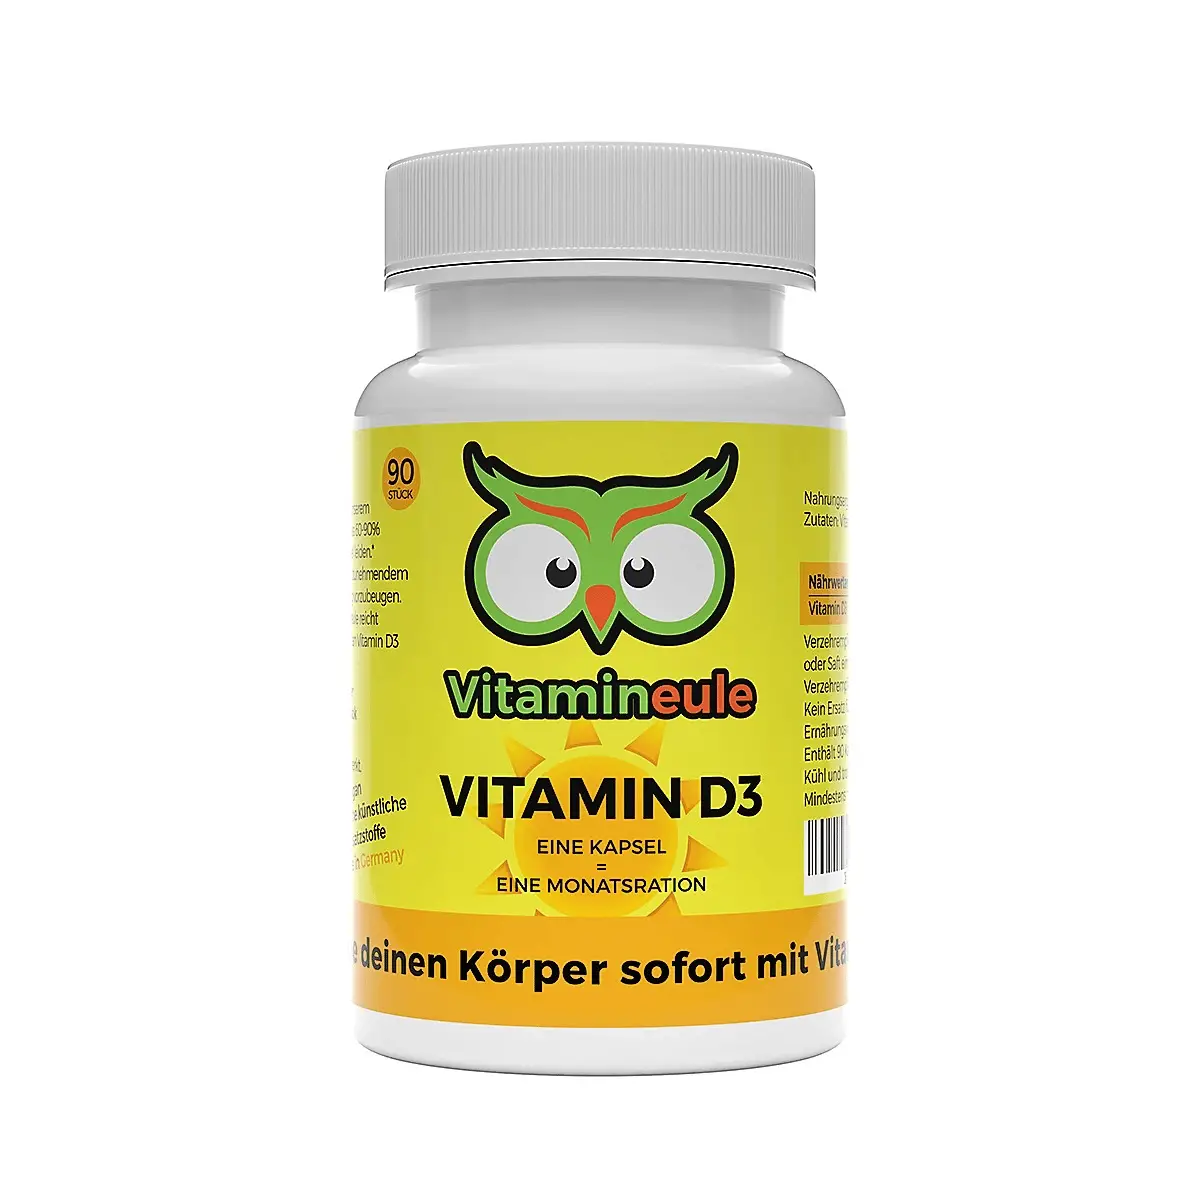 Can vitamin D and calcium be taken together?